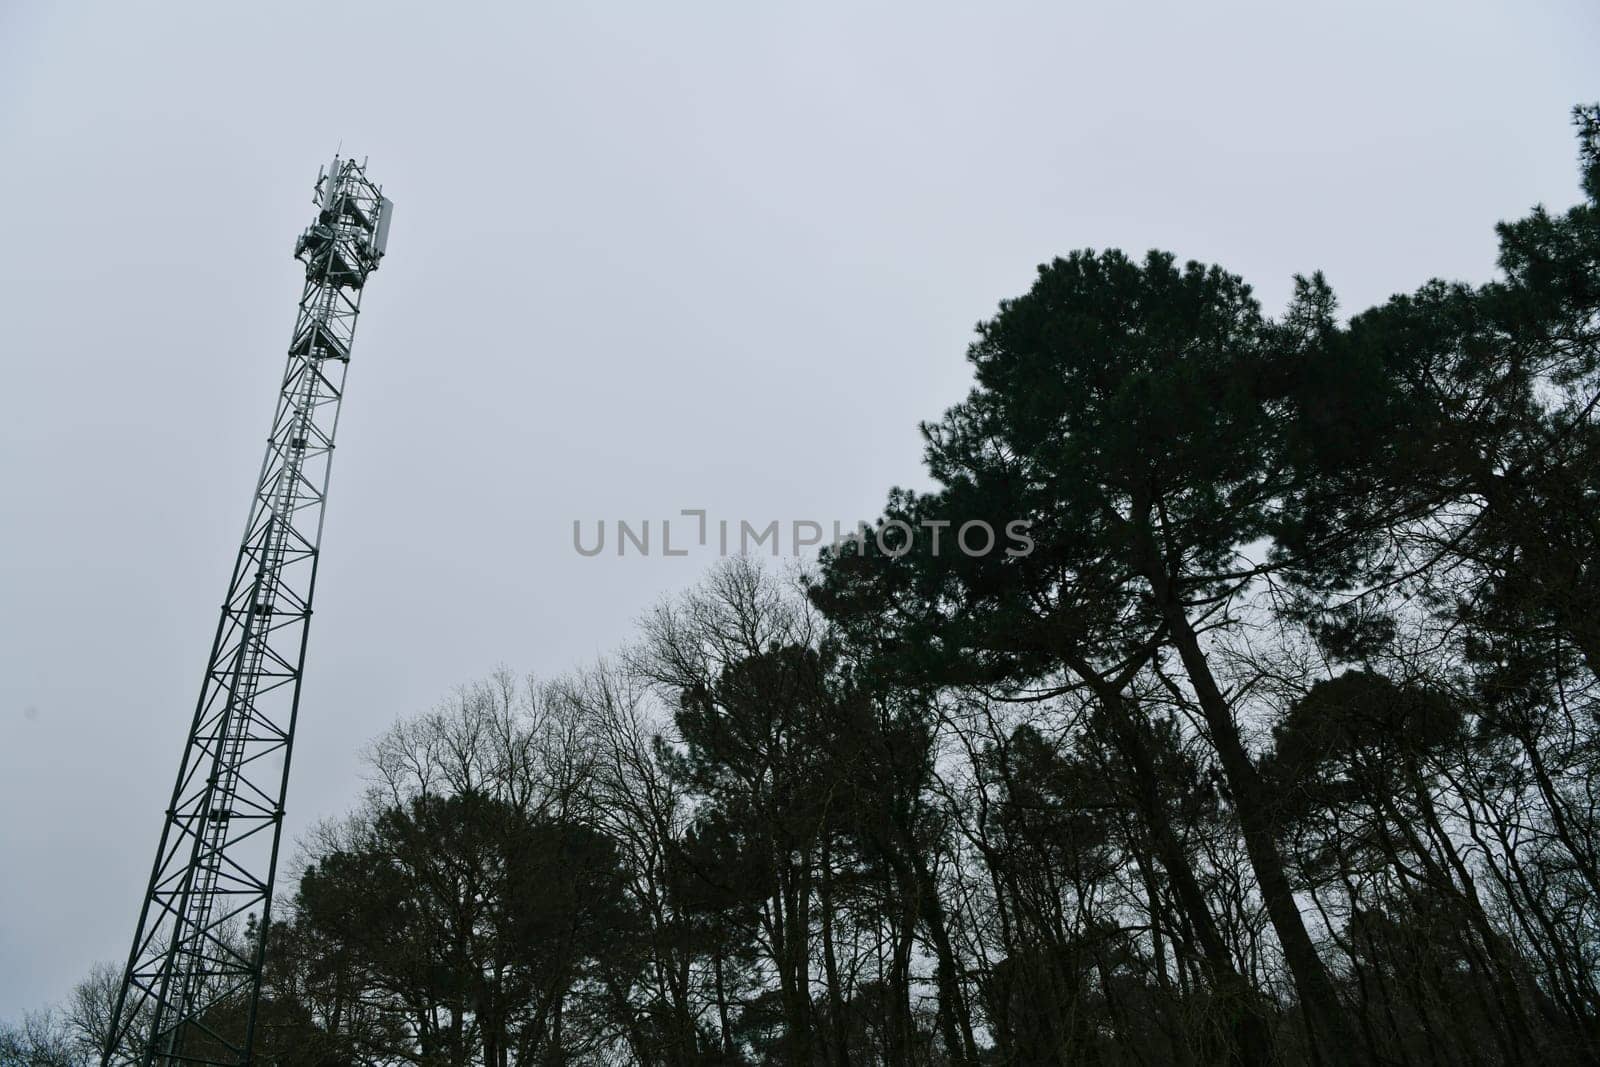 Deployment of the 5G network. Laying antennas on a mobile phone mast in the winter atmosphere. France, Gironde, February 2024. High quality photo